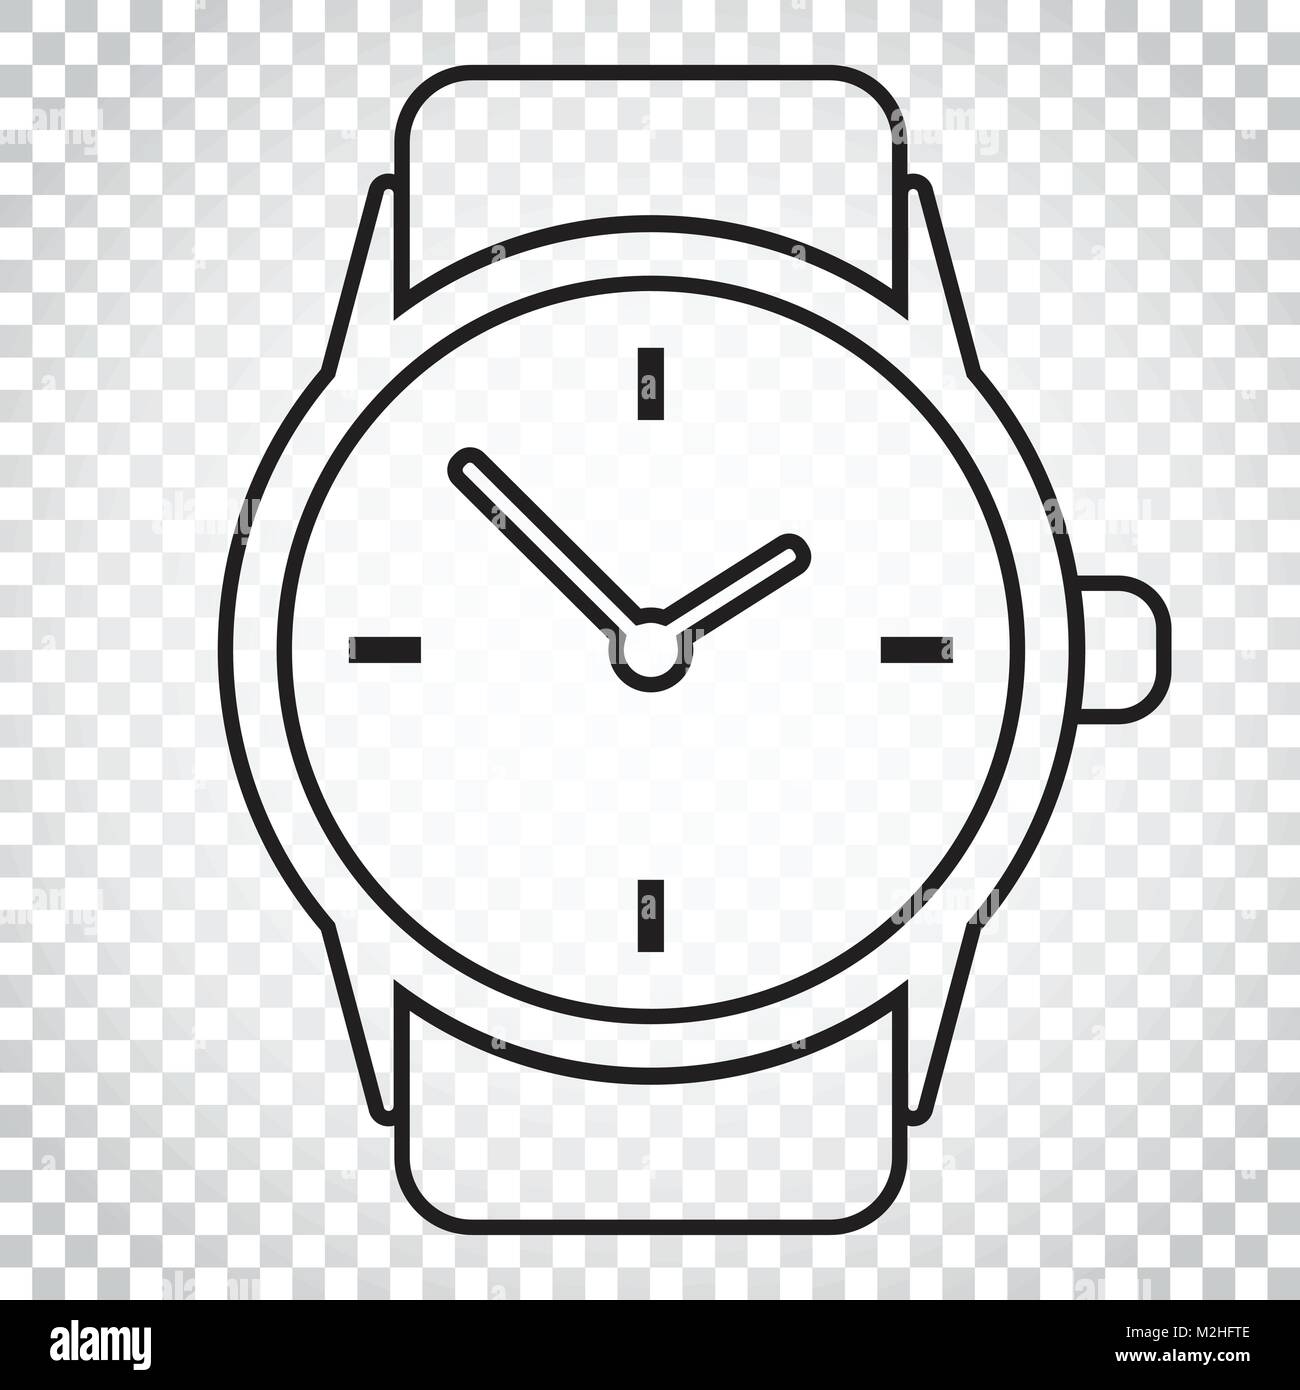 Watch Icons Cliparts, Stock Vector and Royalty Free Watch Icons  Illustrations